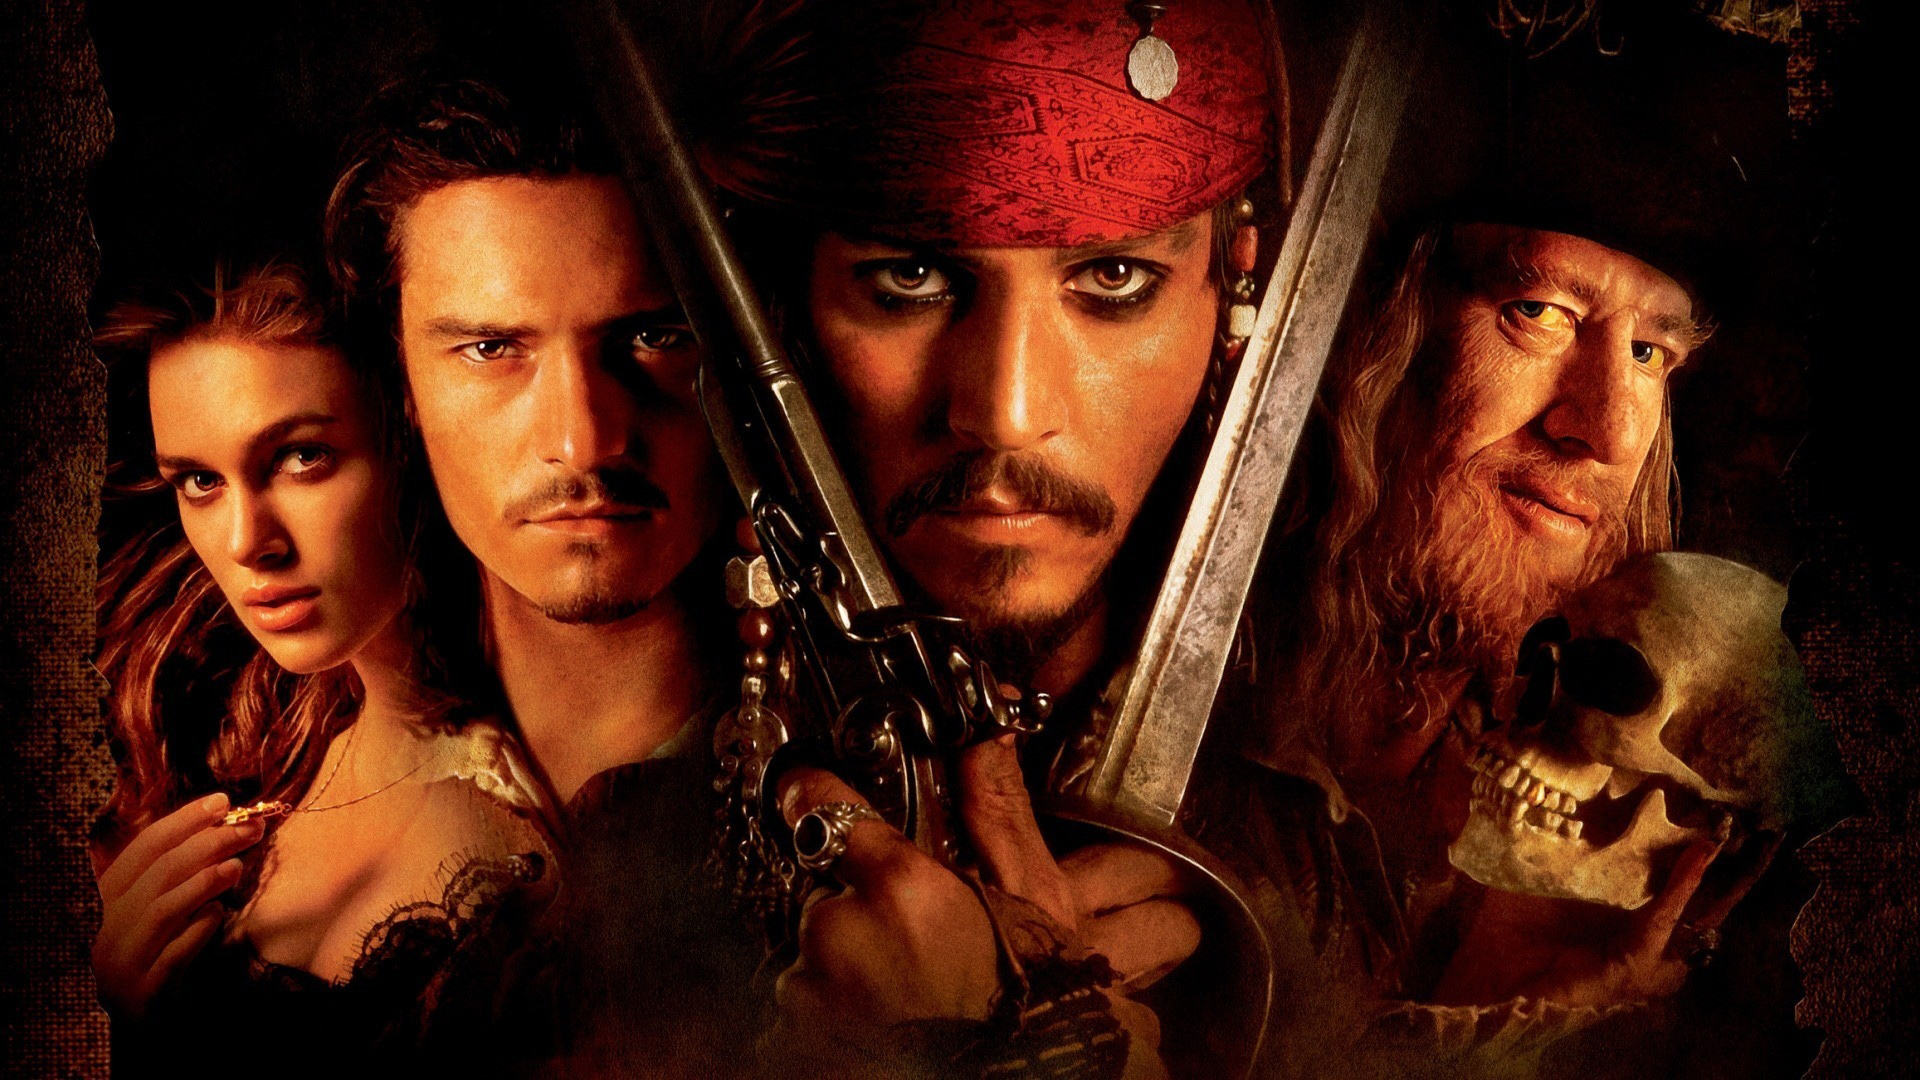 elizabeth swann, pirates of the caribbean: the curse of the black pearl, jack sparrow, pirates of the caribbean, johnny depp, movie, geoffrey rush, hector barbossa, keira knightley, orlando bloom, will turner